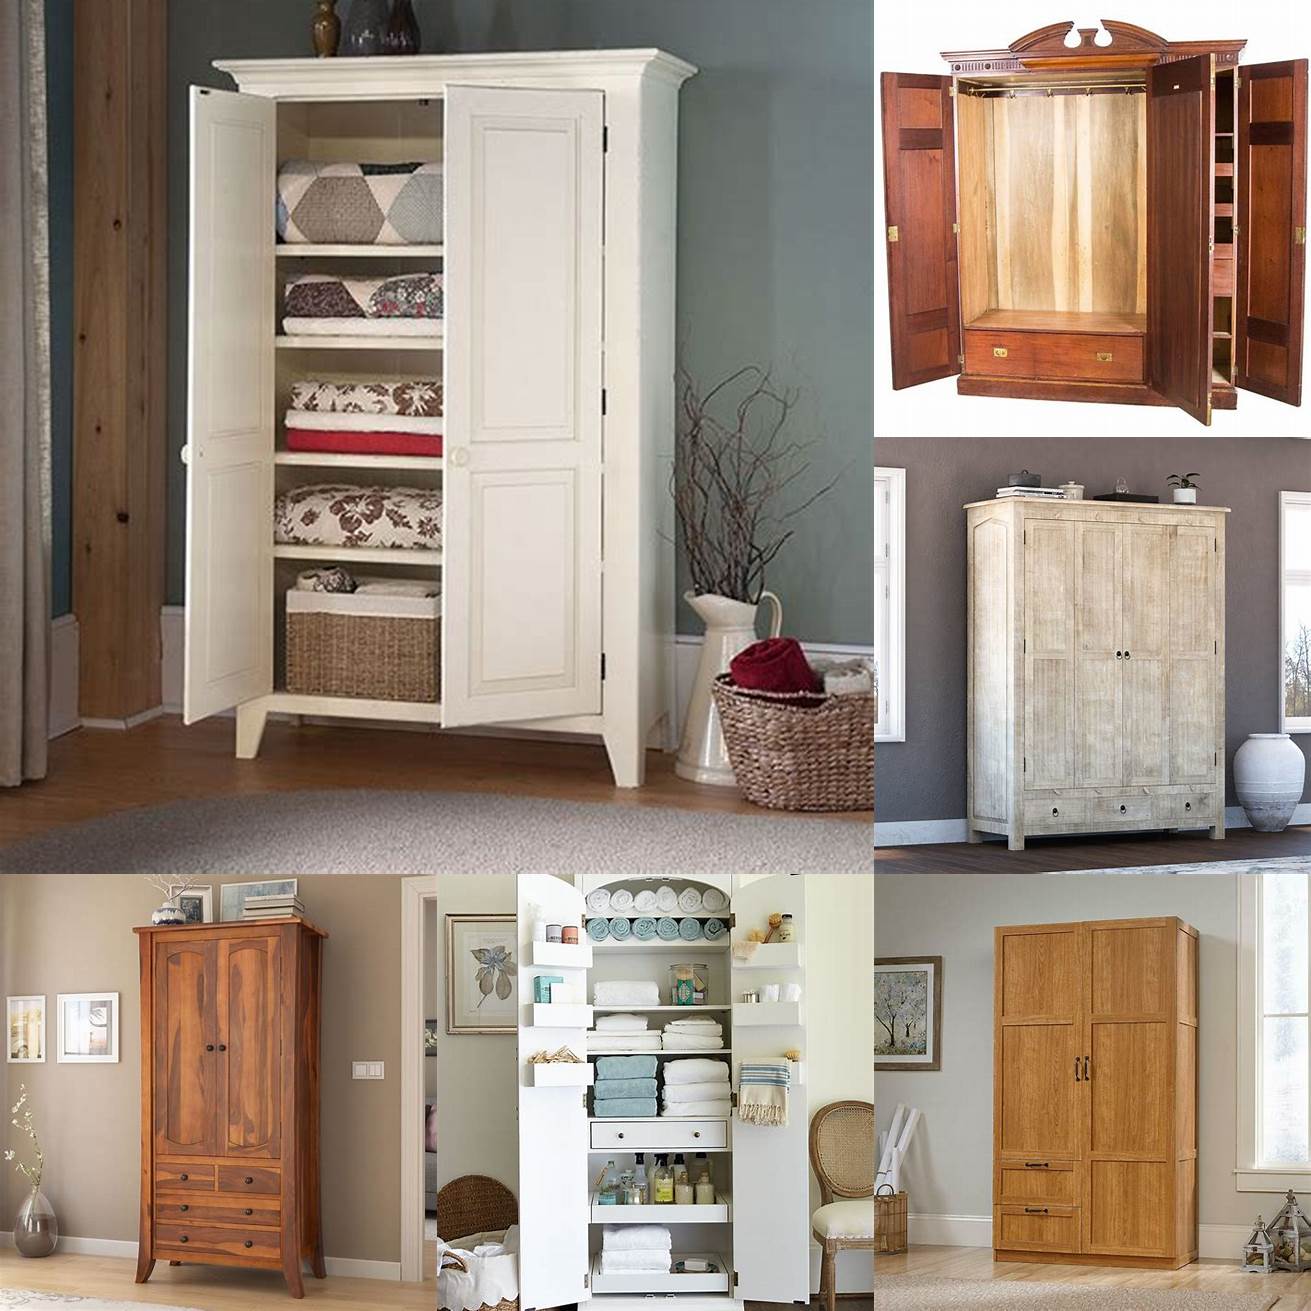 3 Armoire a large standing closet that can be used to store clothes linens or other items